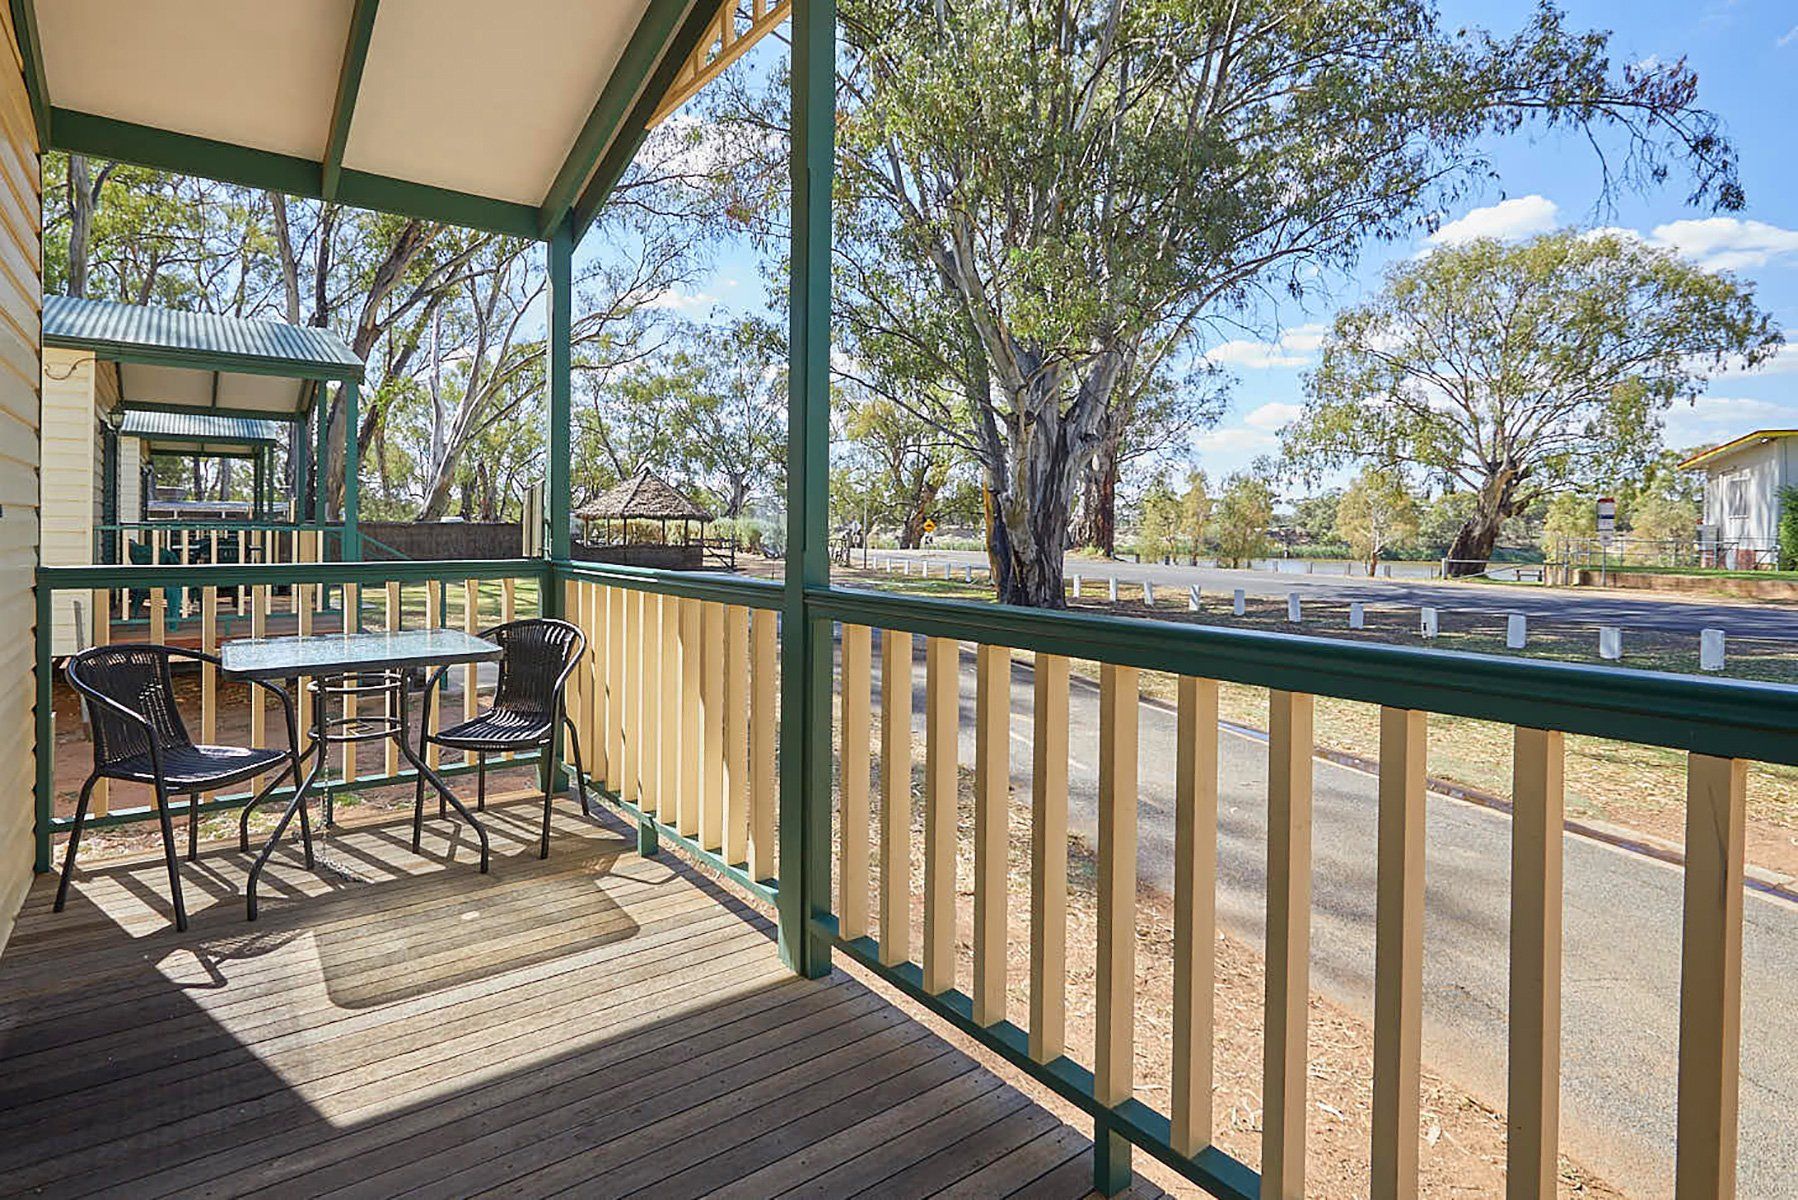 Apex Riverbeach Holiday Park cabin's with a front deck overlooking river beach and trees in the background .